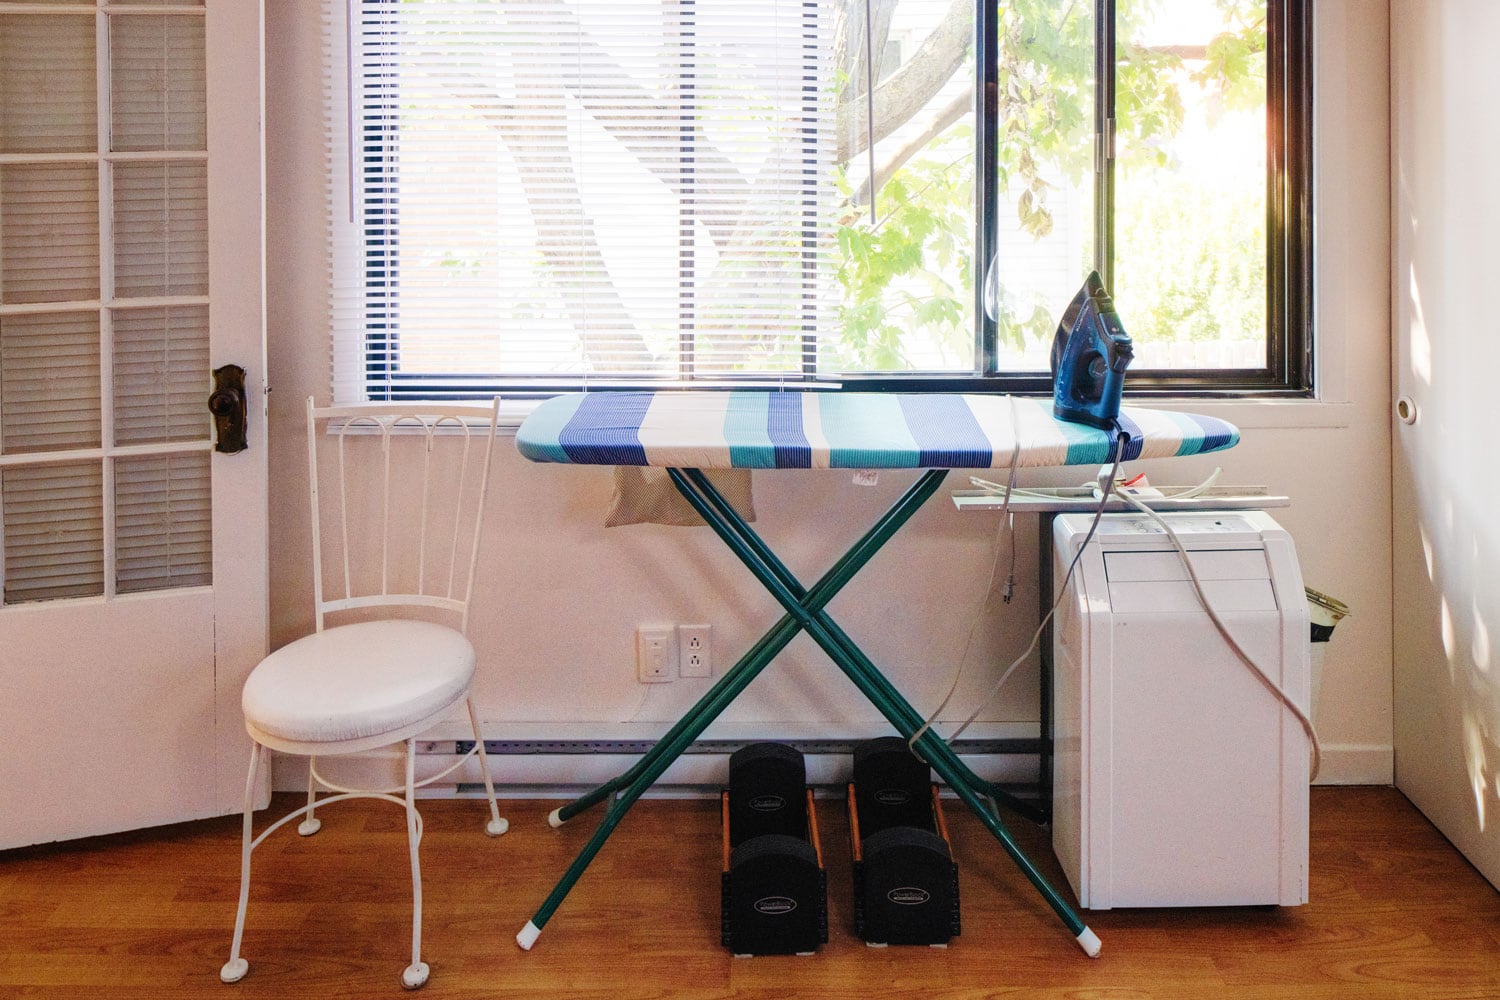 An ironing table and a portable air conditioning unit, How To Clean A Portable Air Conditioner [Including Coils And Water Tank]